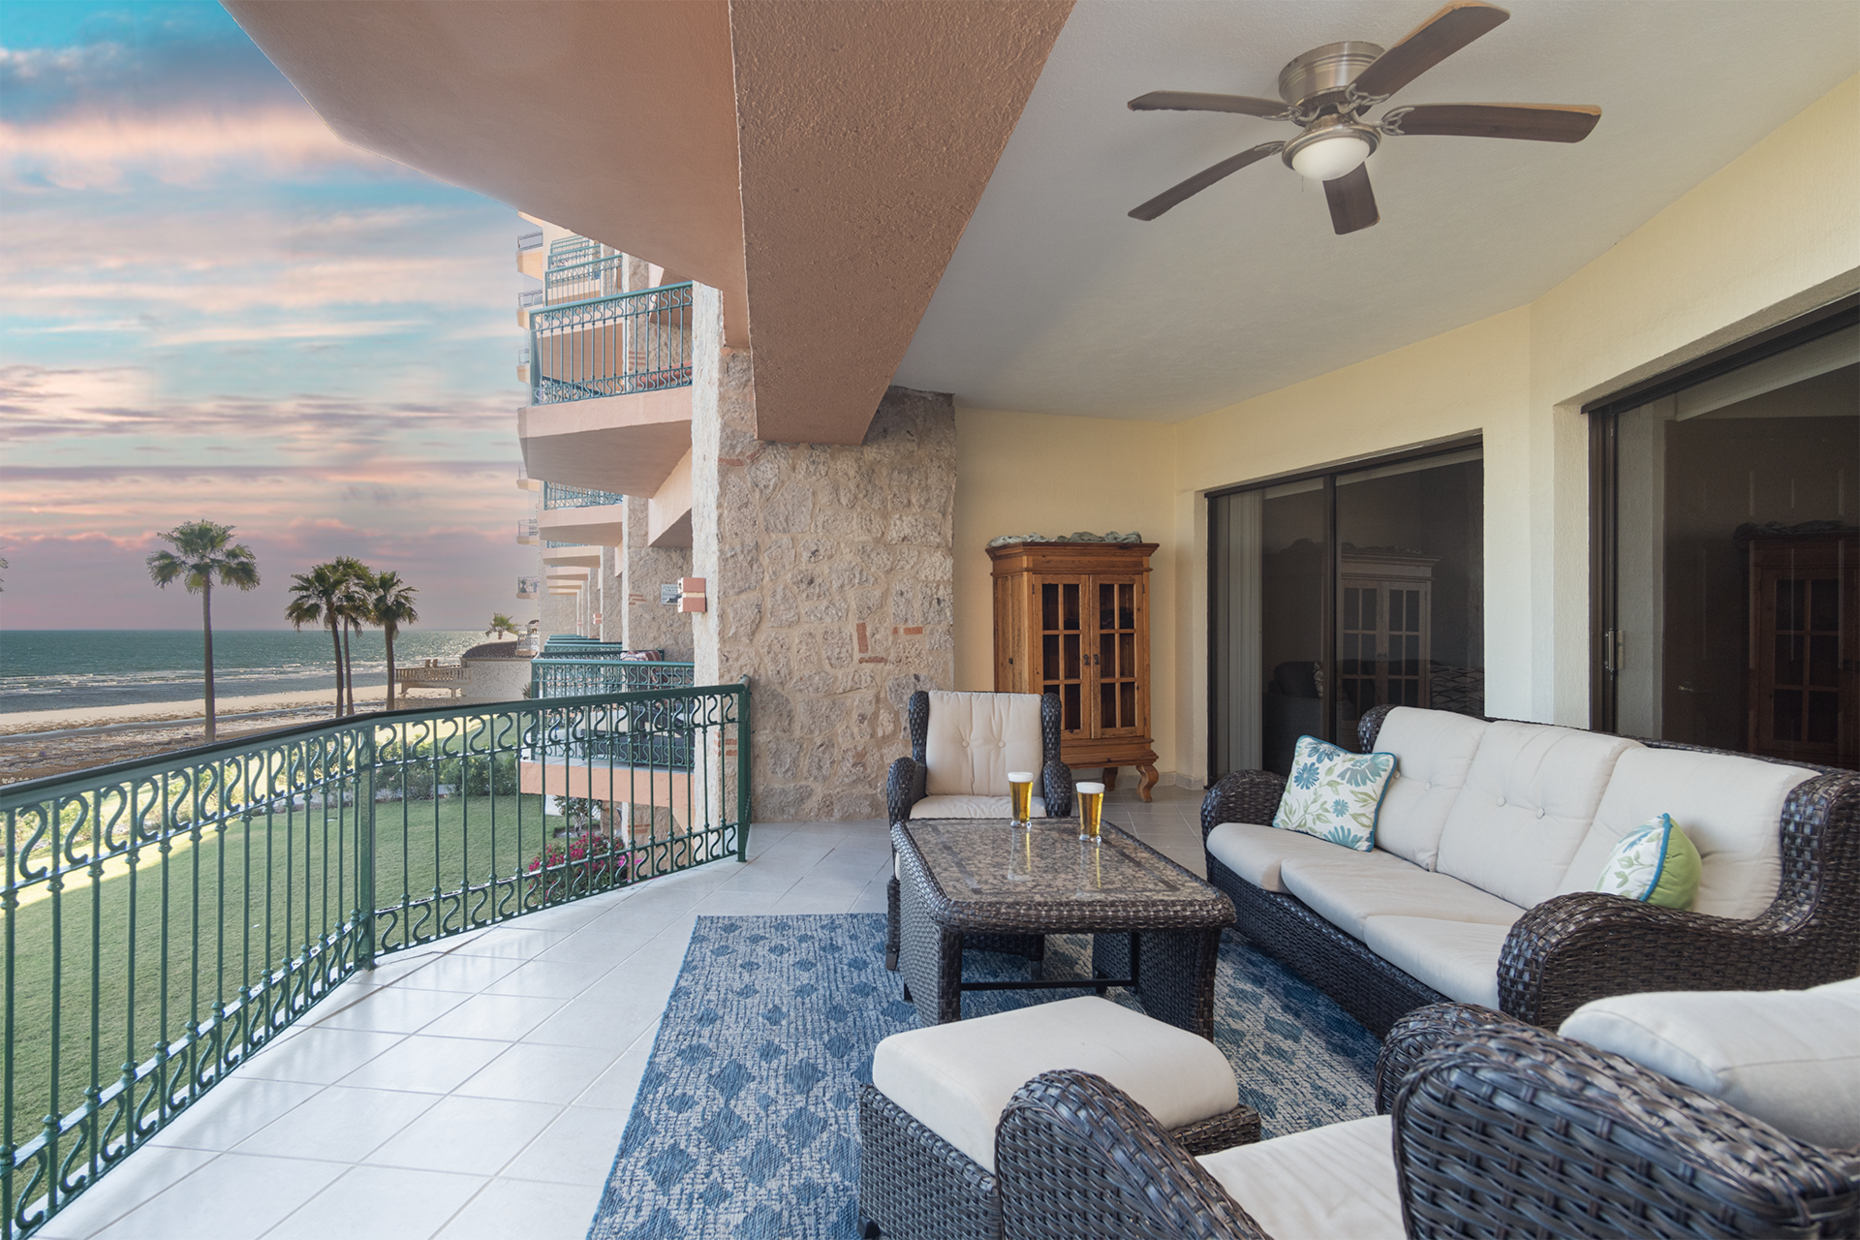 Sunsets are stunning at Sonoran Sea W208.